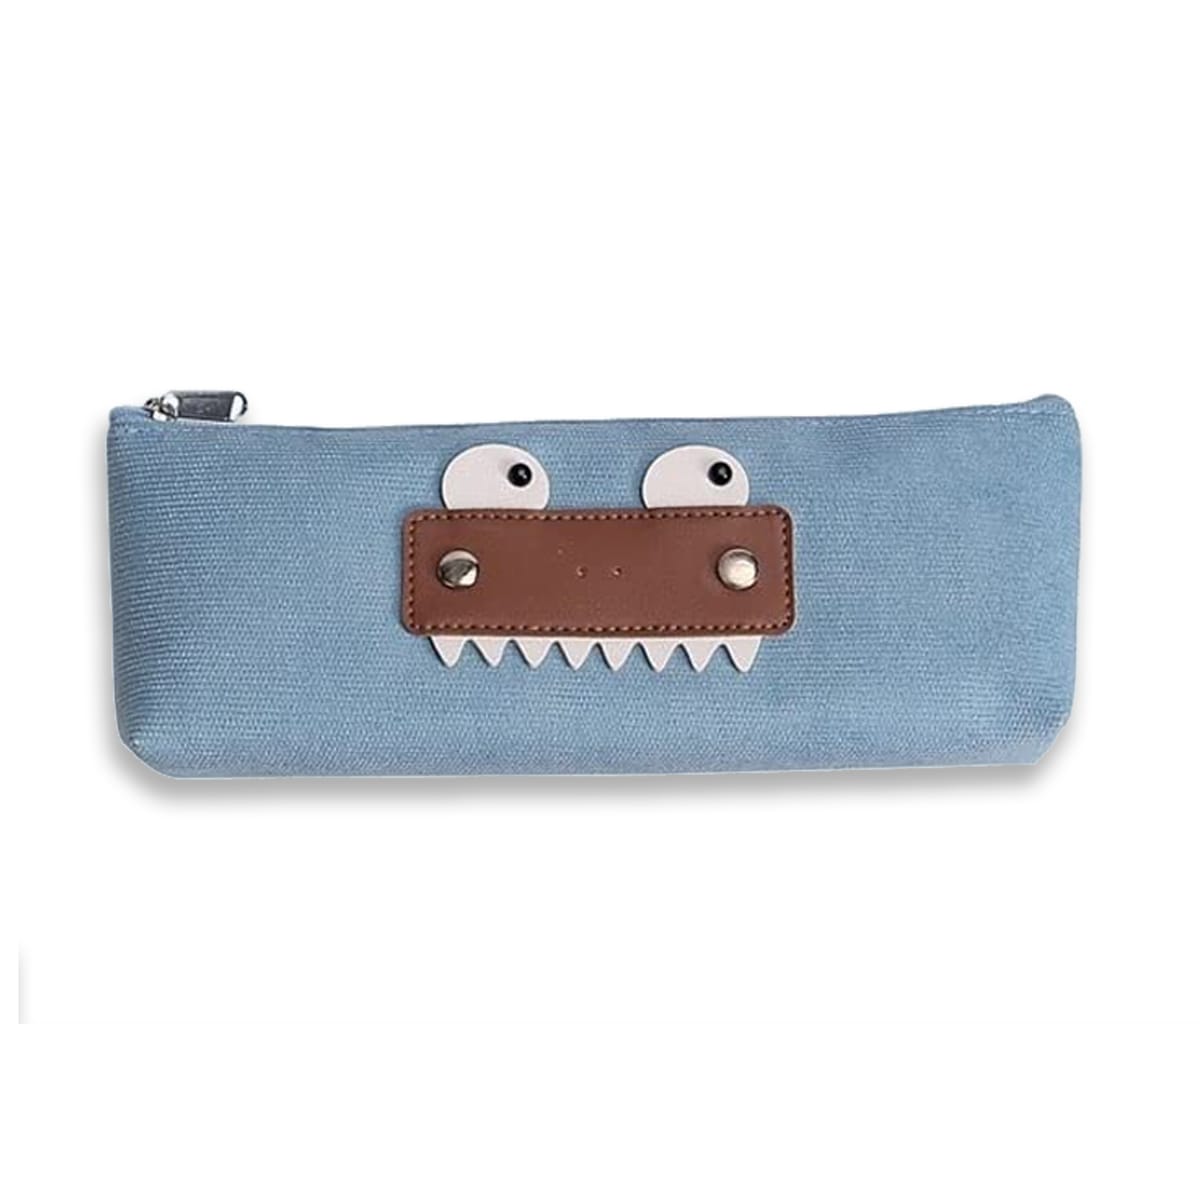 Little Croc Stationery Pouch